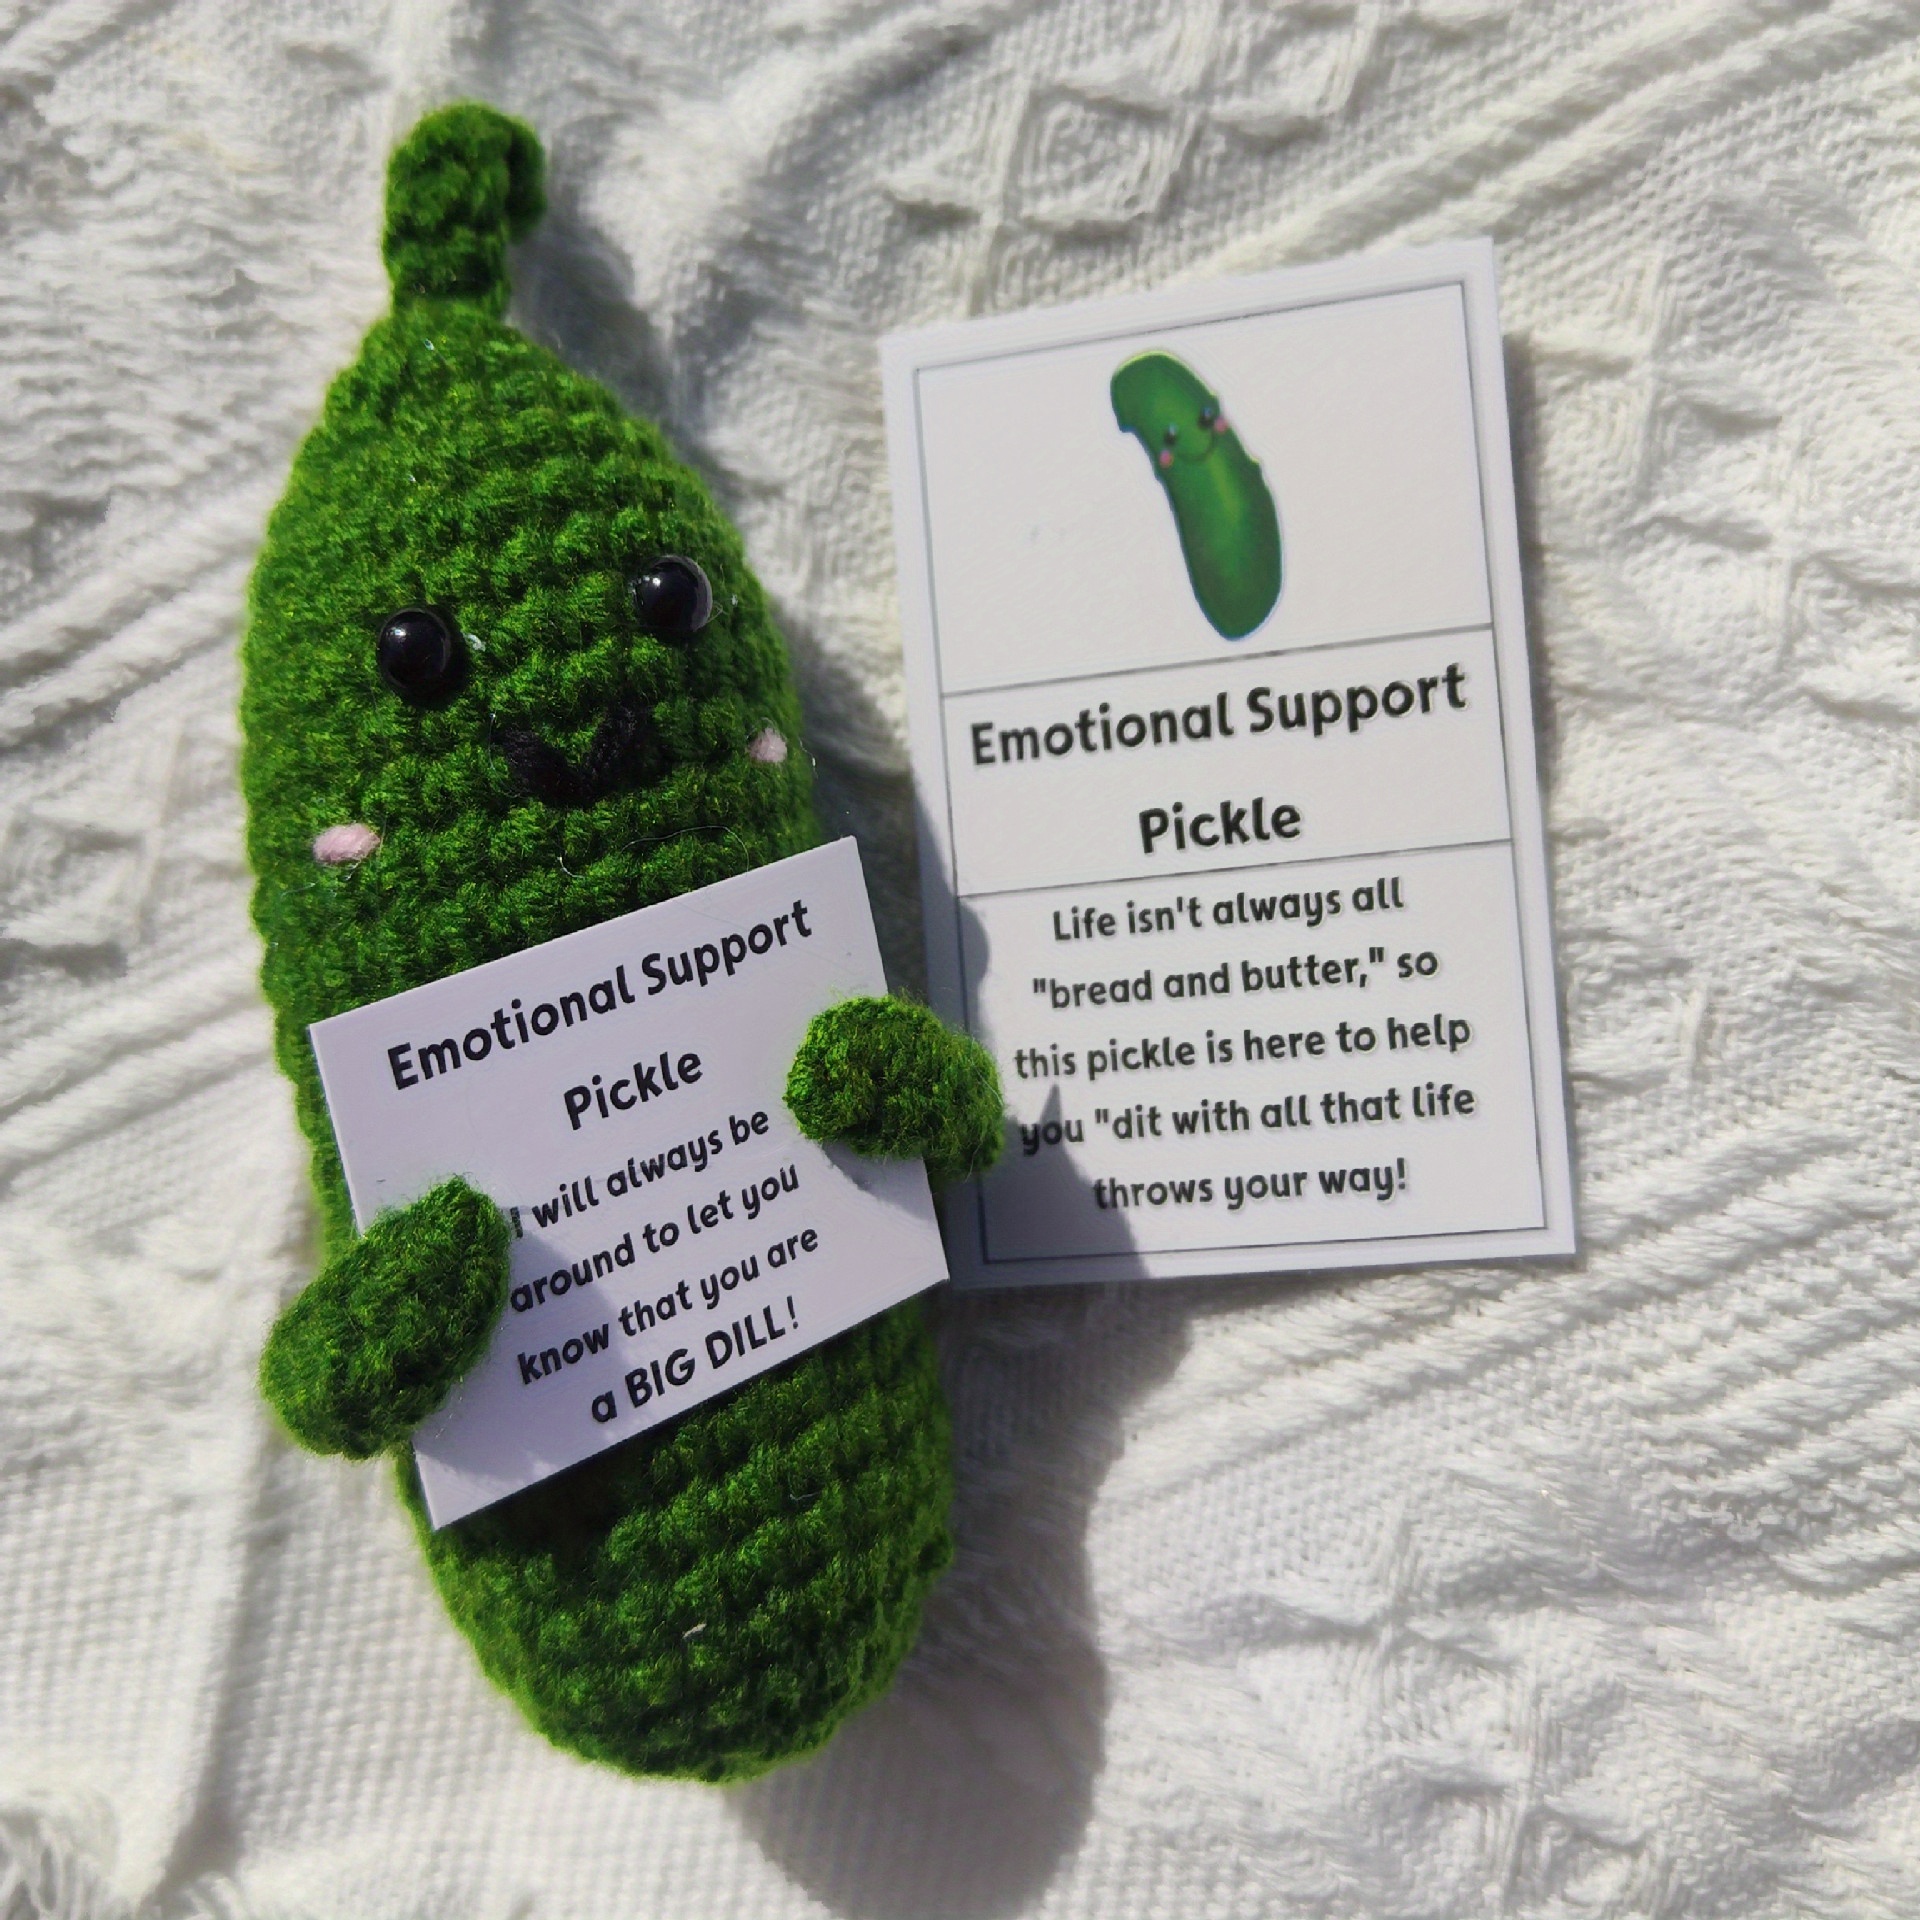 Emotional Support Pickle Gift Funny Pickle Ornament Smiling Green Cucumber  Knitted Doll Positive Card Ornament for Kids' Crafts - AliExpress